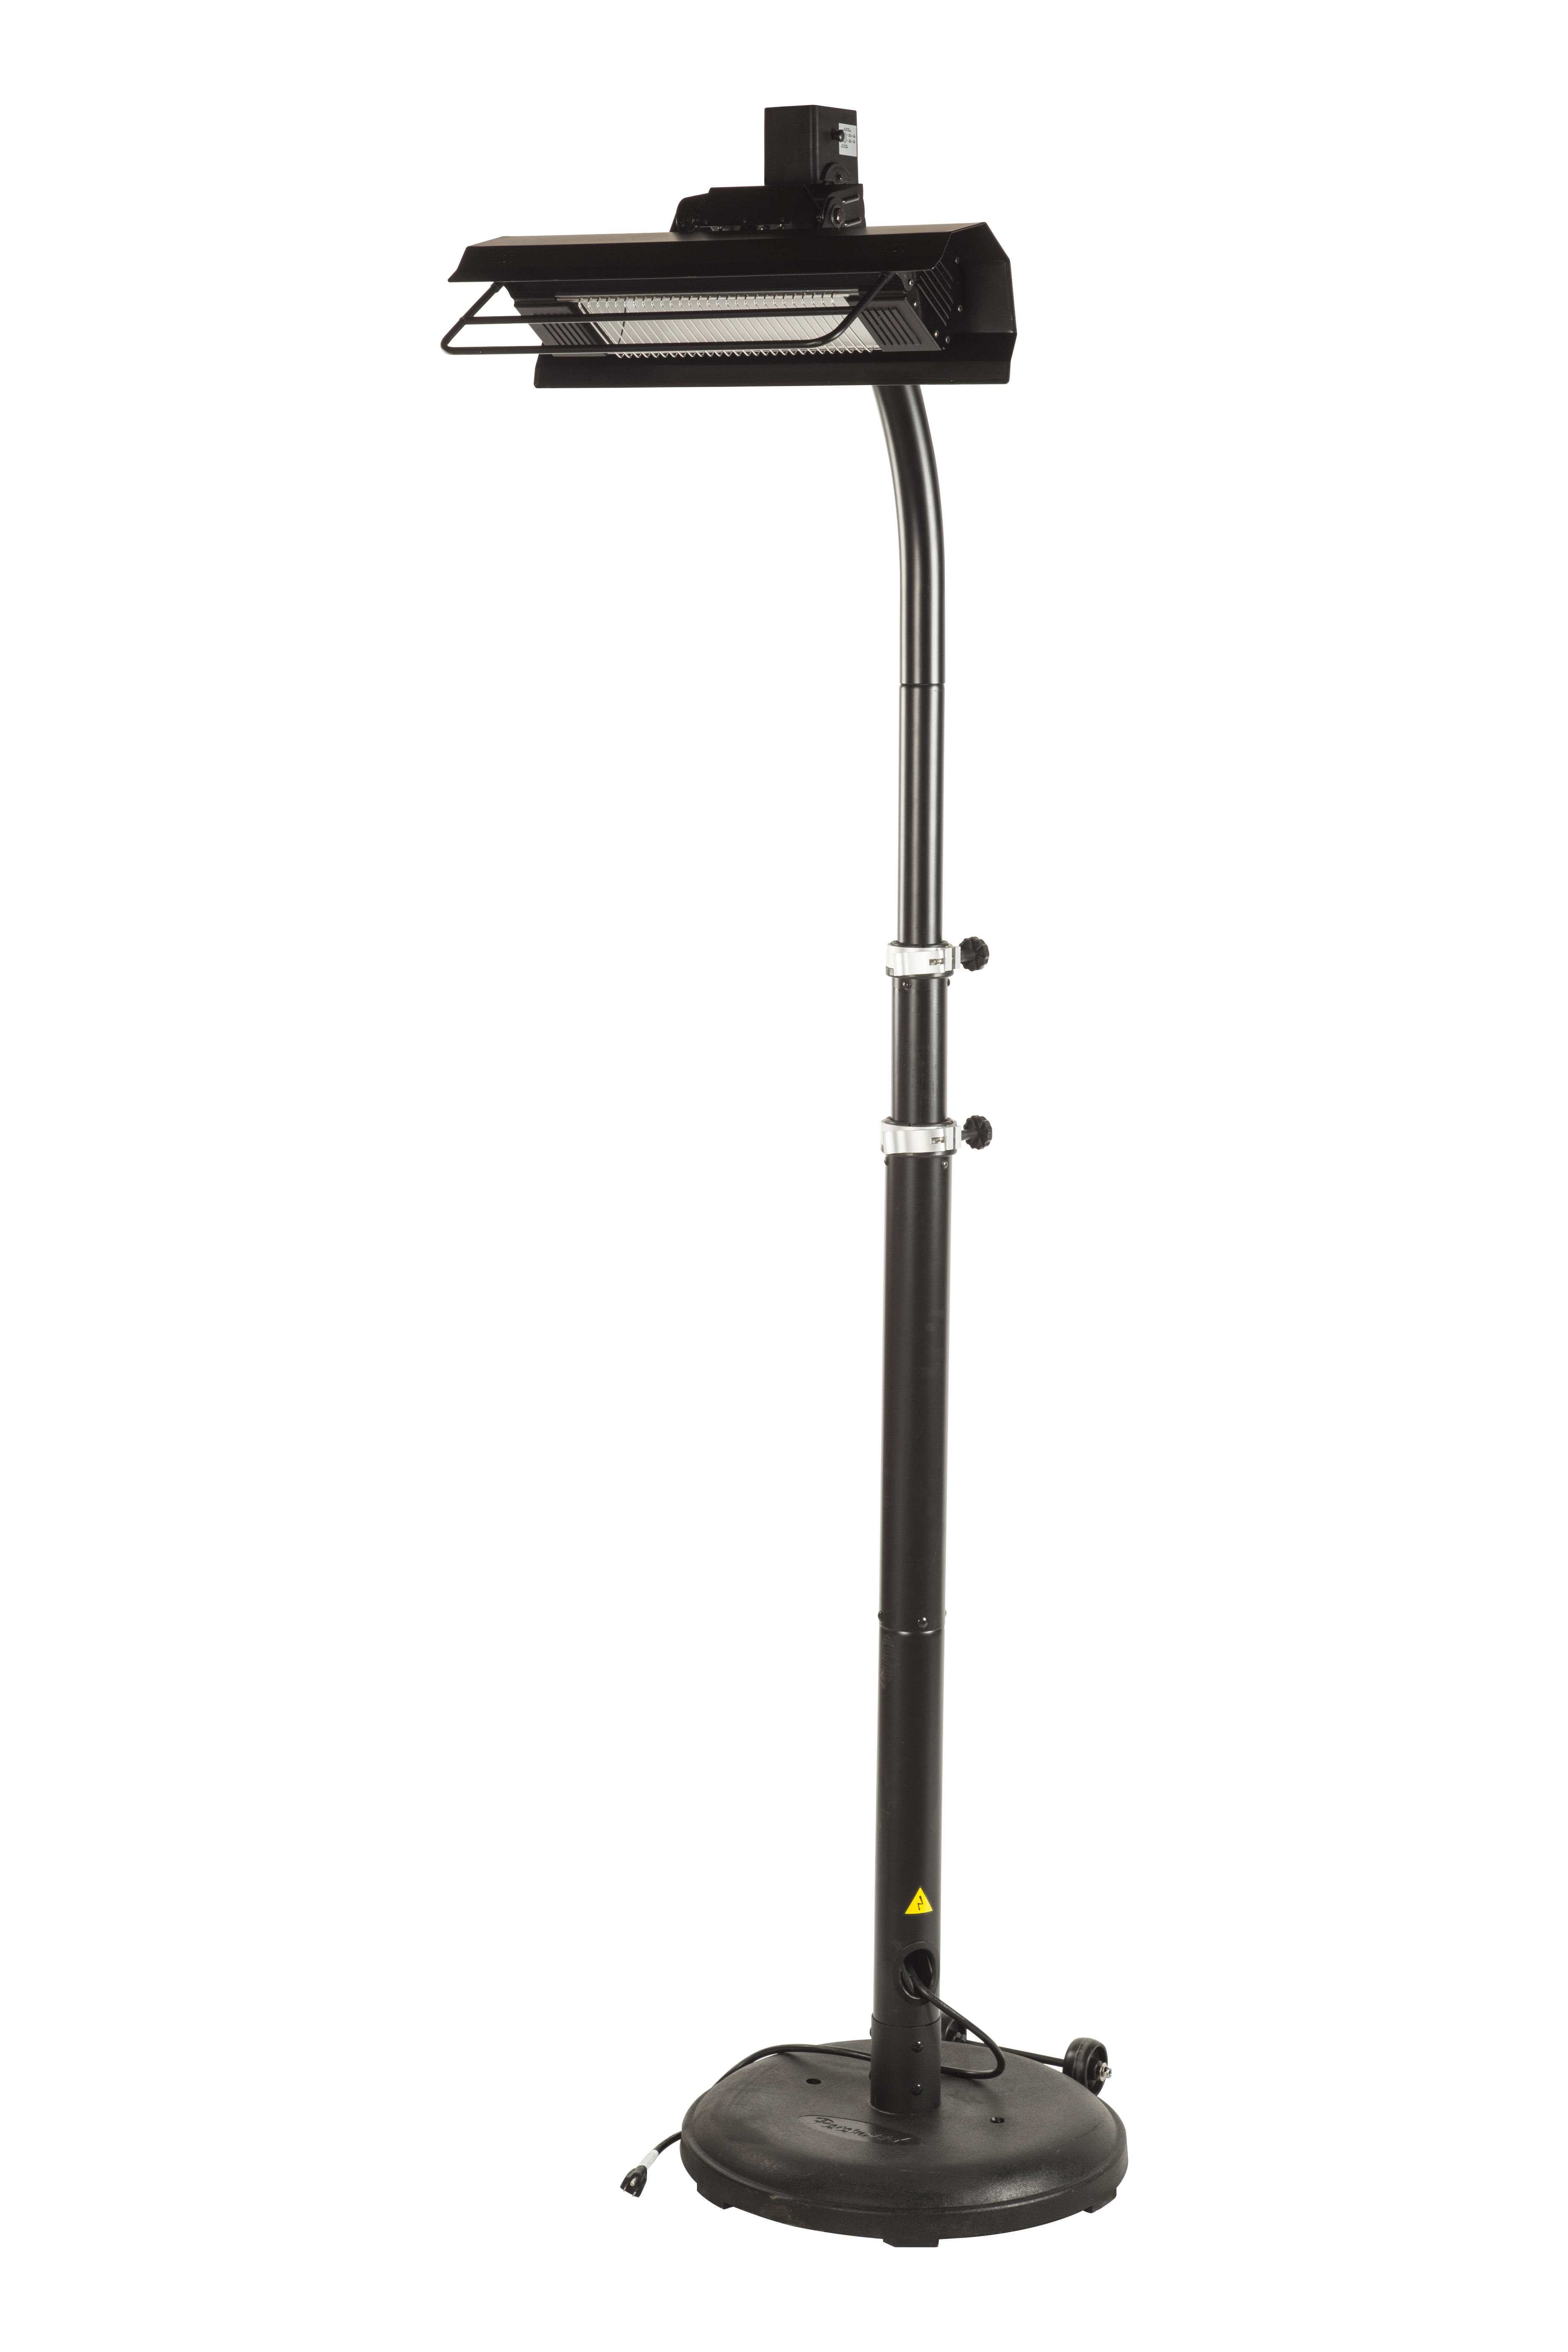 Image of Paramount Outdoor Black Infrared Patio Heater